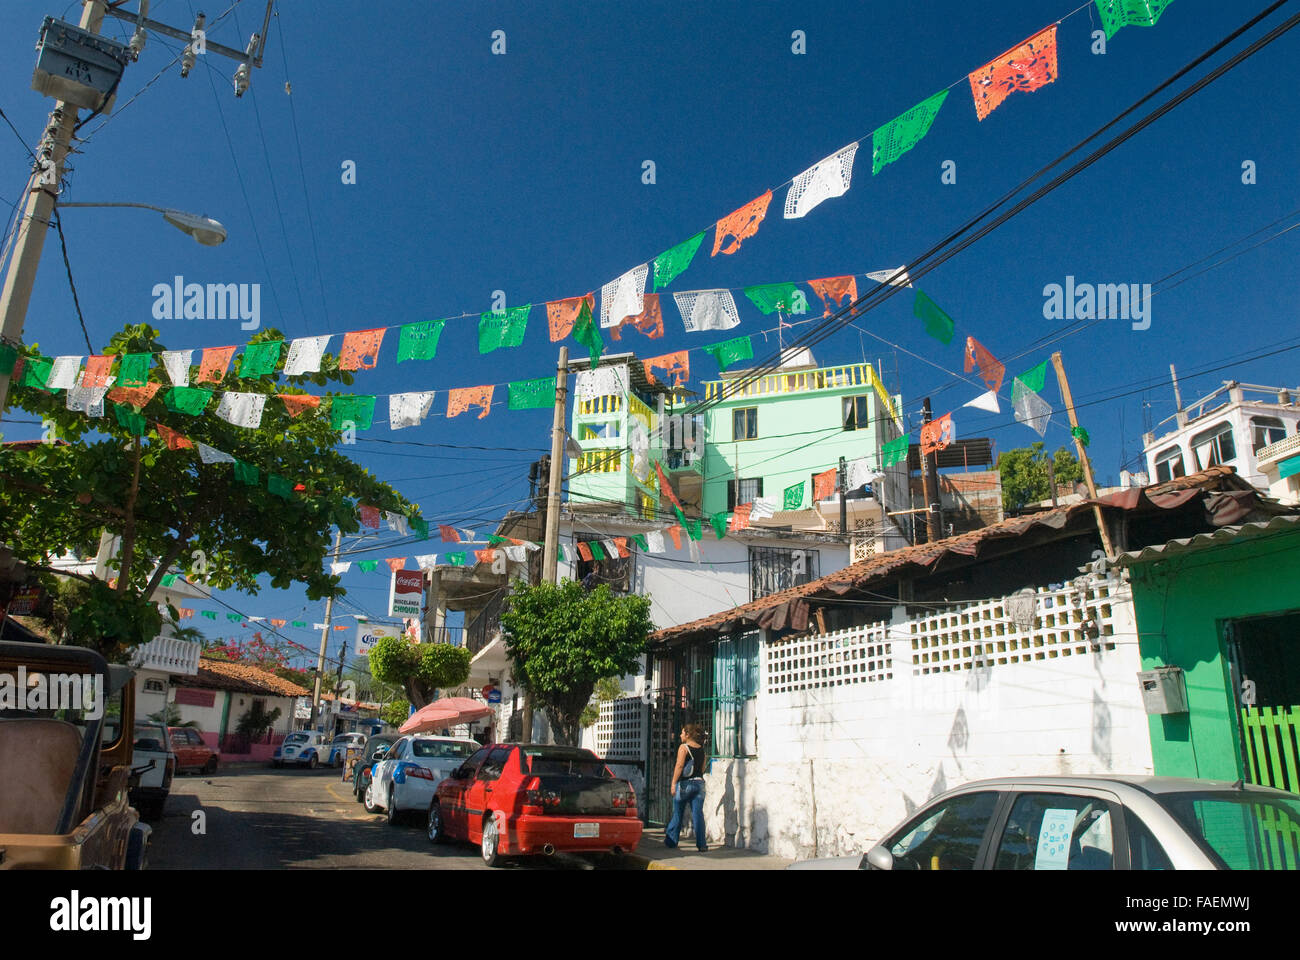 Colorful flags and banners above streets of Acapulco, Mexico Stock Photo